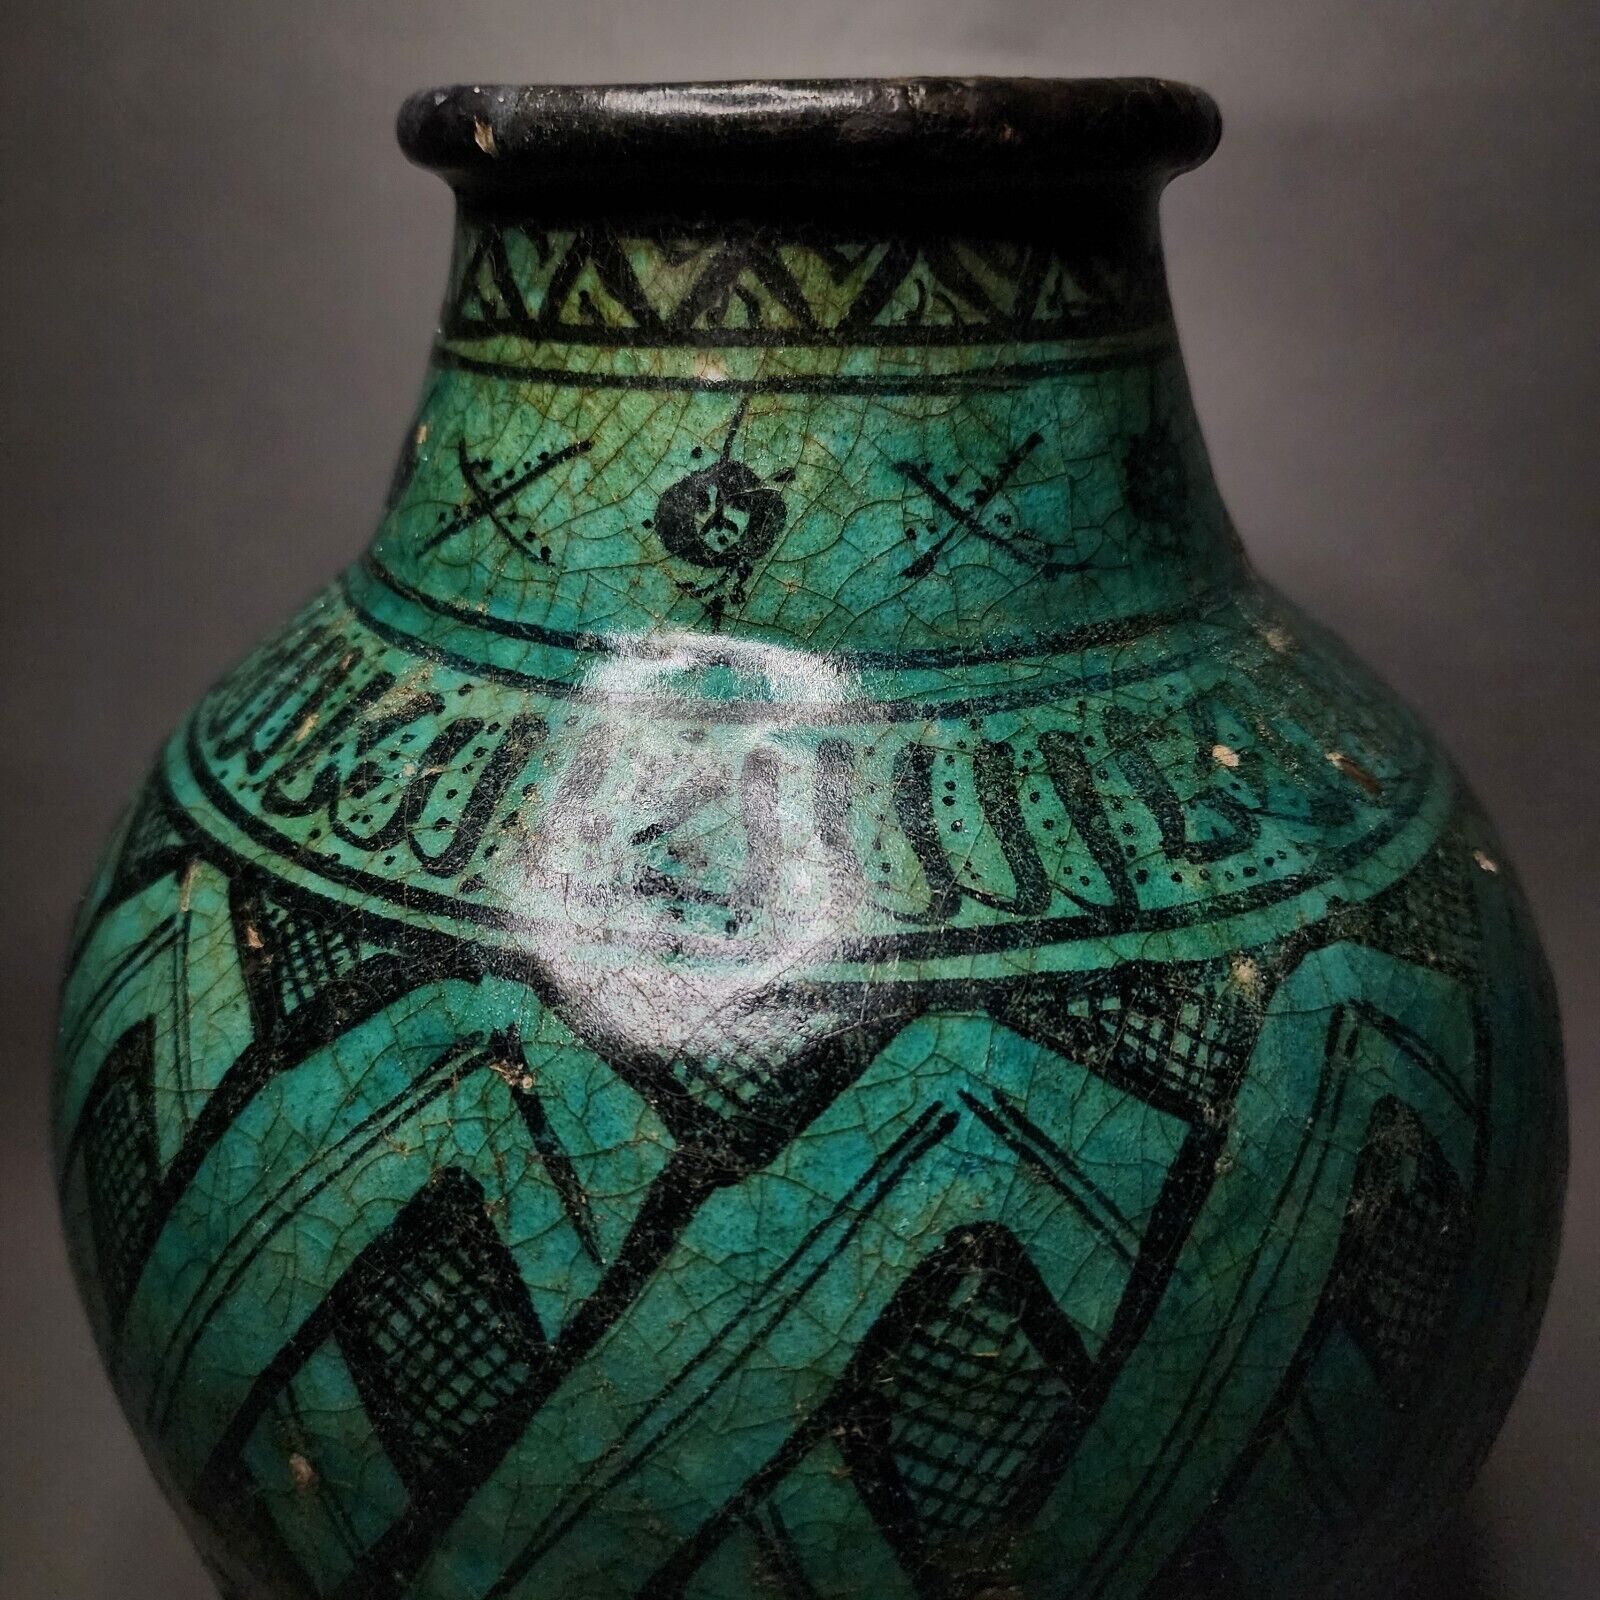 A 12TH-13TH CENTURY IMPORTANT LARGE KASHAN POTTERY TURQUOISE KUFIC VESSEL. 